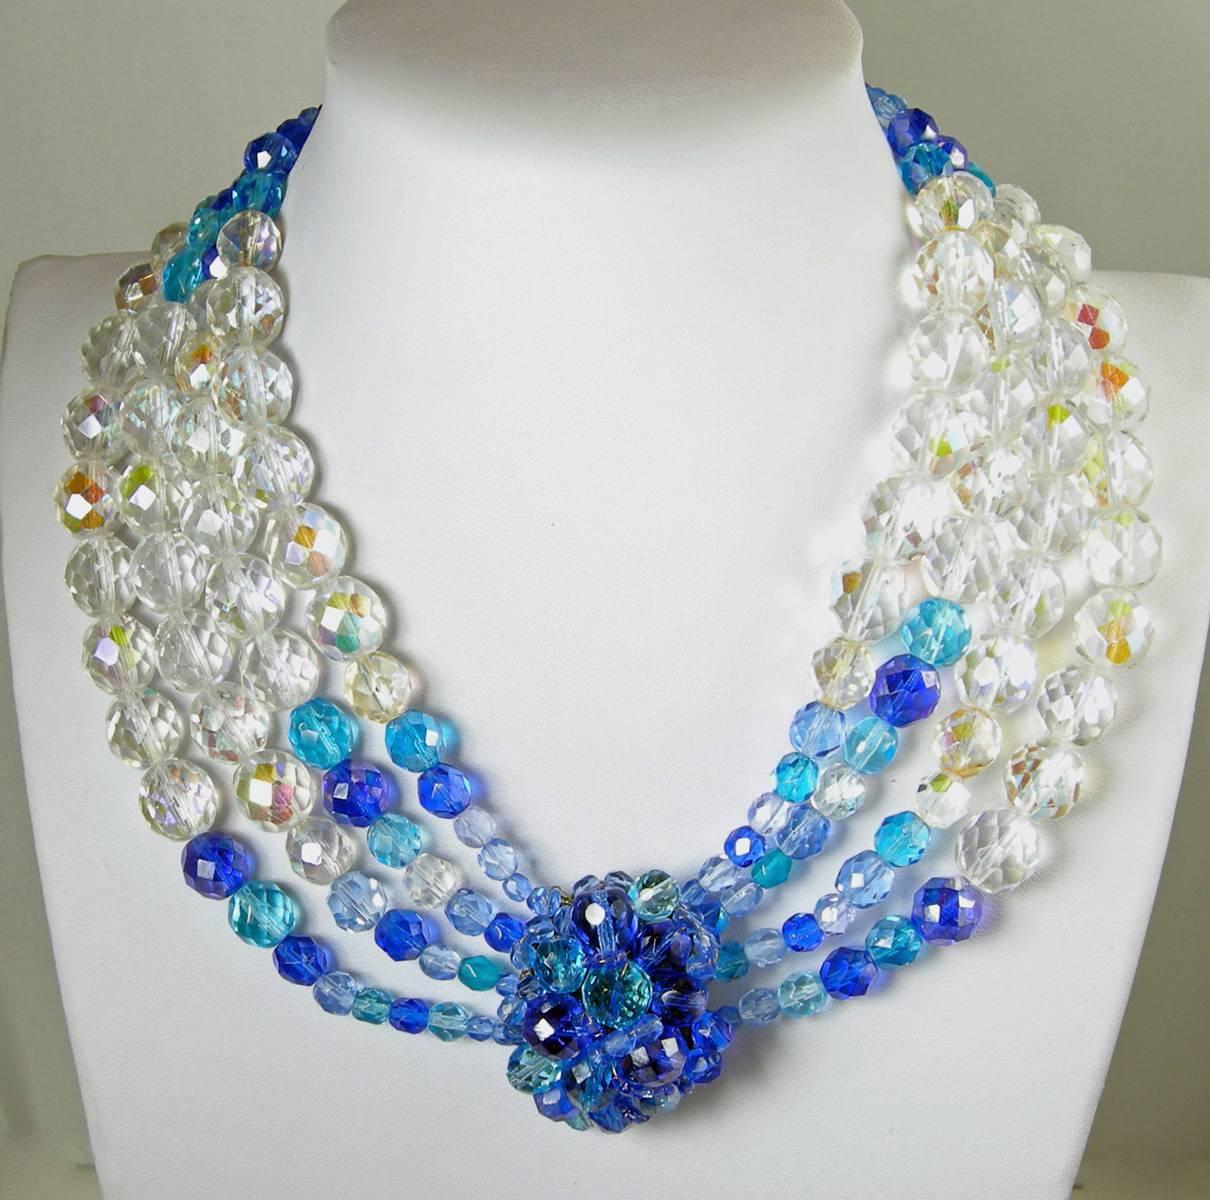 This vintage 1950s Coppola e Toppo Italy necklace features bezel cut, multi-color blue & clear glass bead multi-strand necklace in a gold-tone setting.  This necklace measures 17 1/2” long with a hook closure; the centerpiece grouping is 1 1/2” x 1